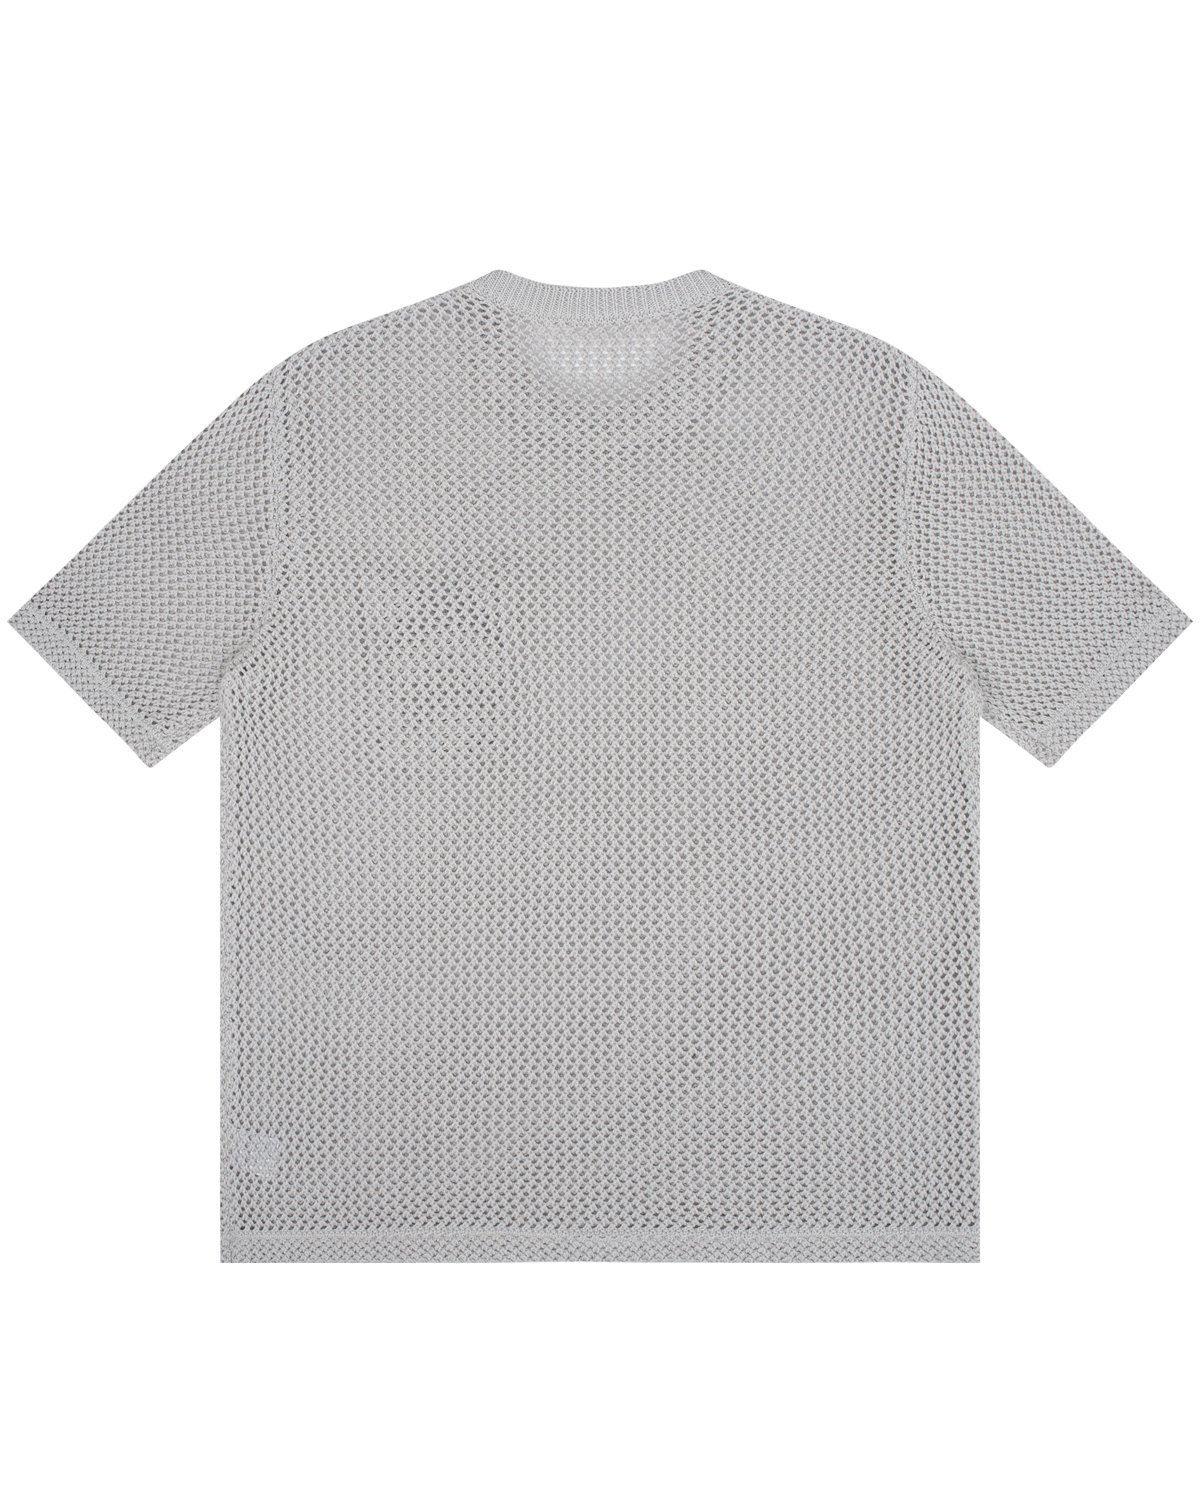 Off The Label Hybrid structures  knit T-shirt grey